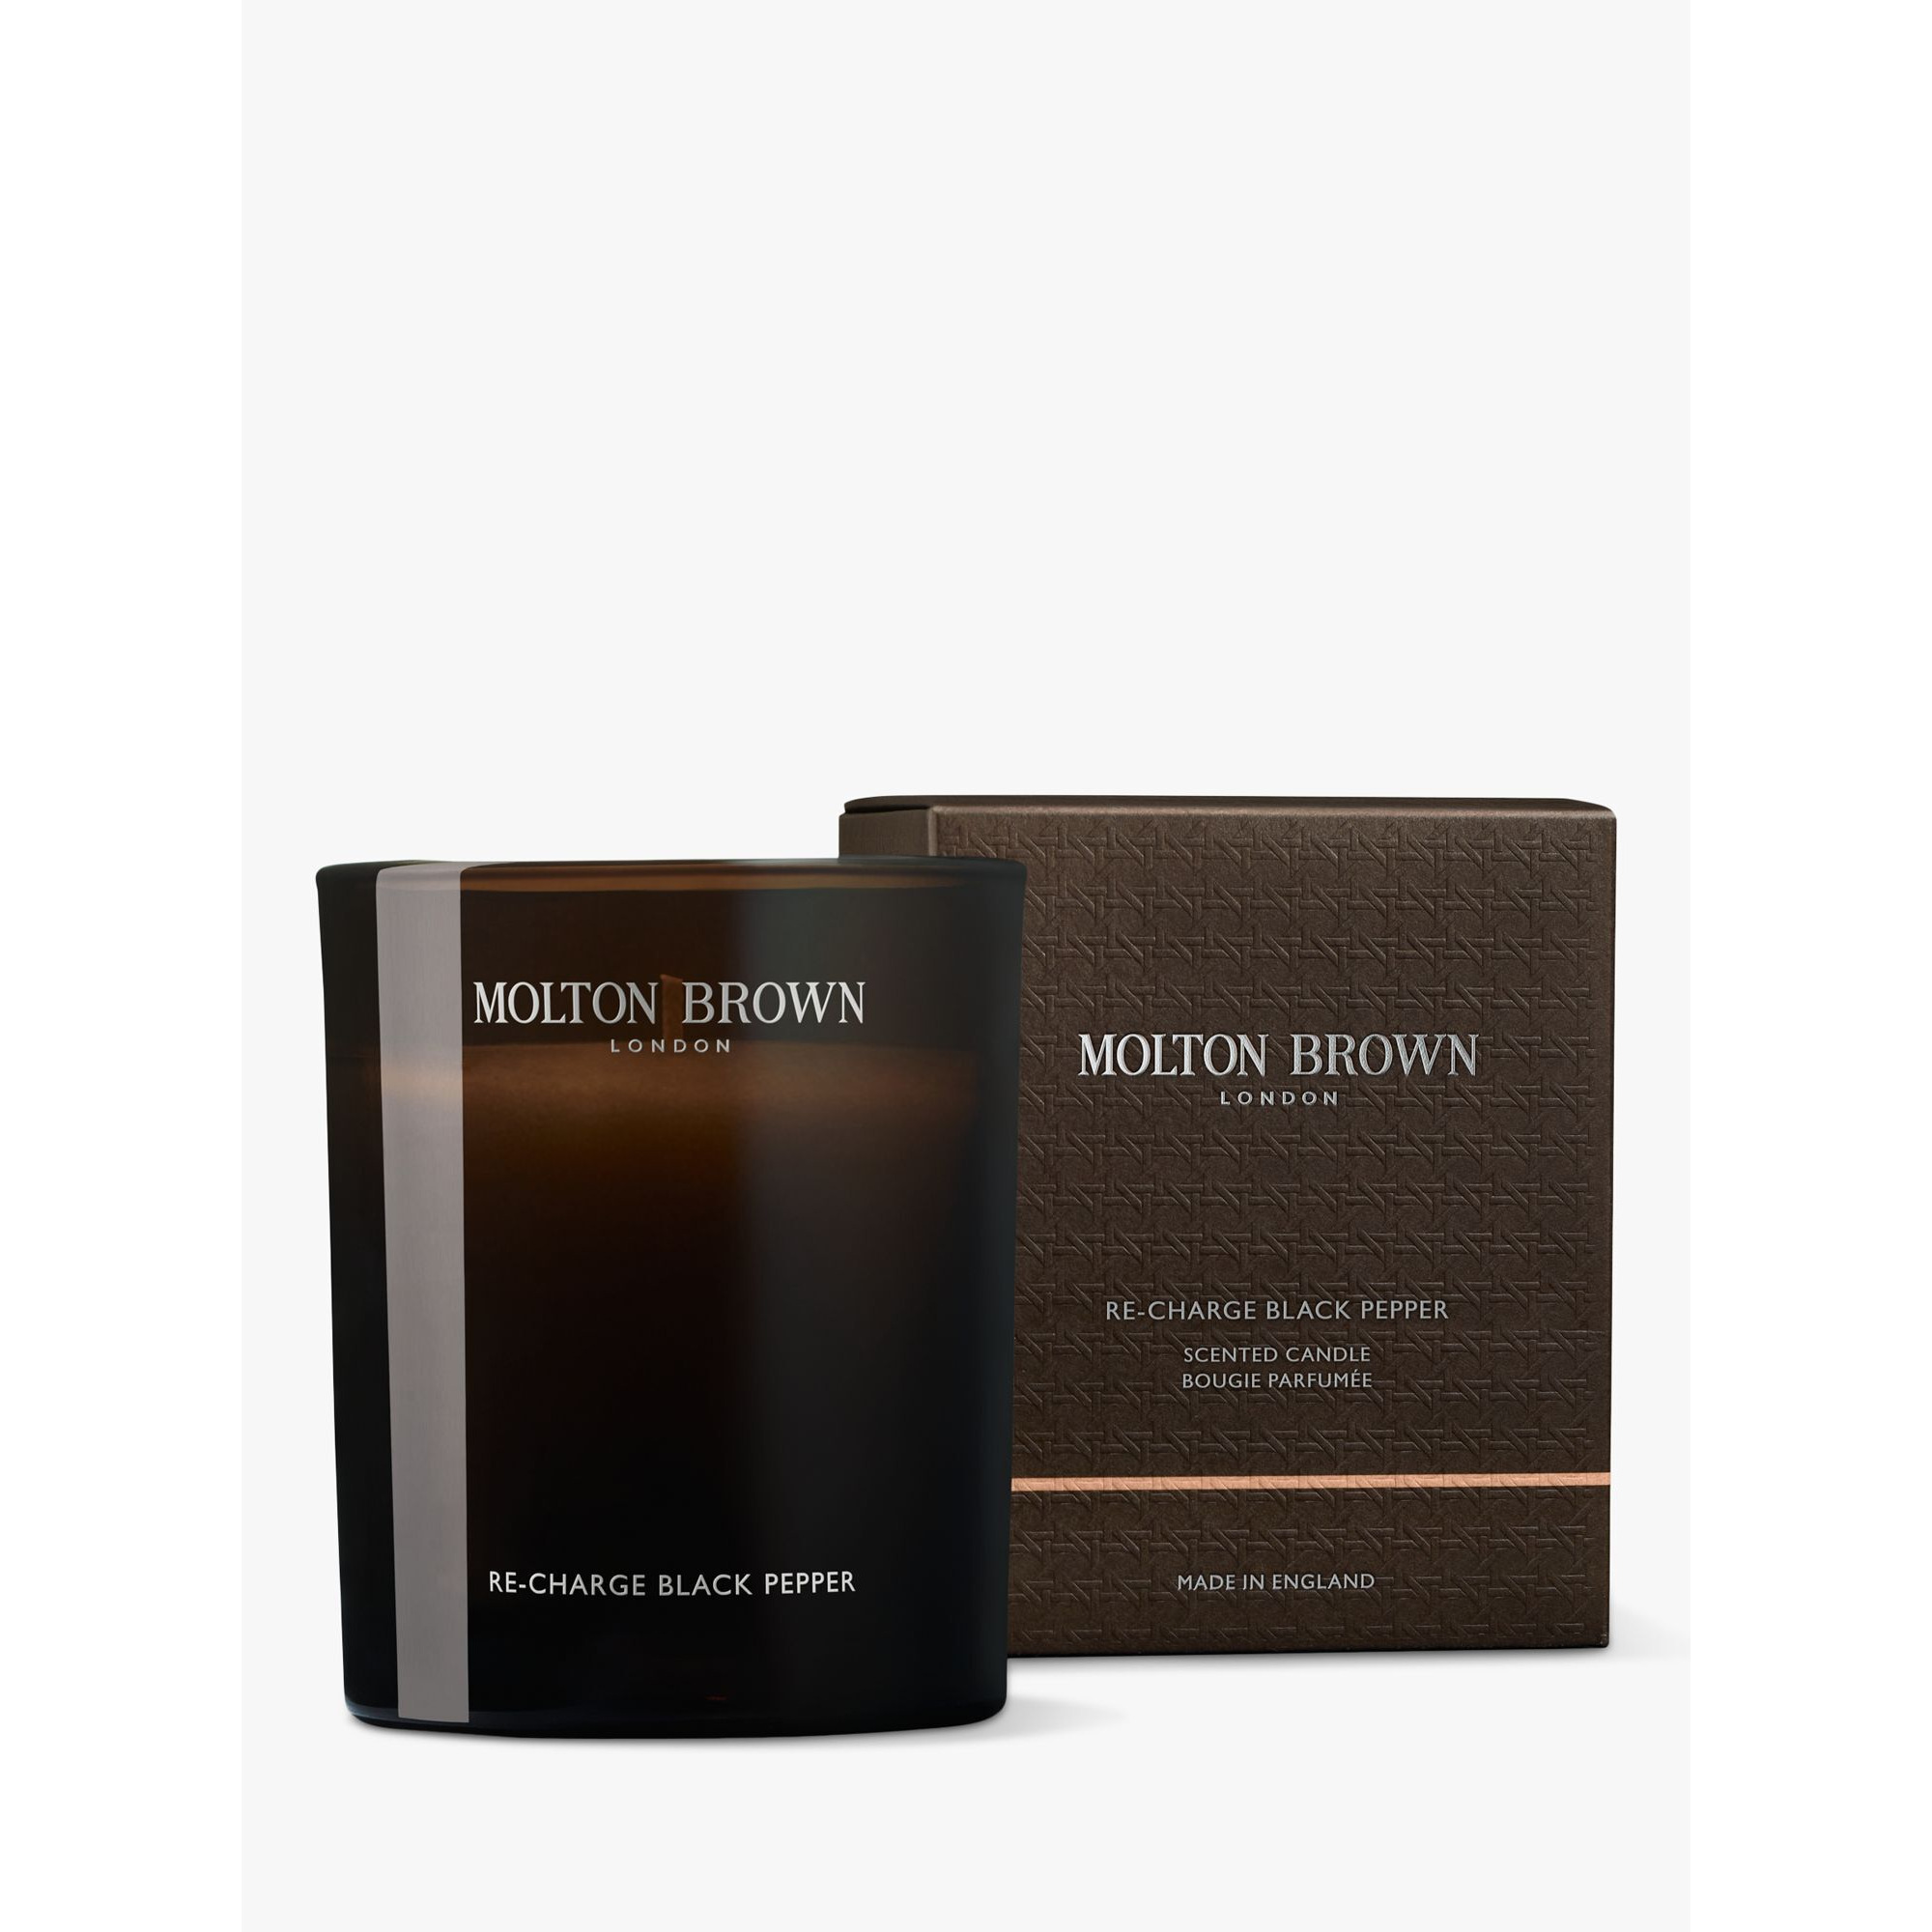 Molton Brown Re-charge Black Pepper Scented Signature Candle, 190g - image 1